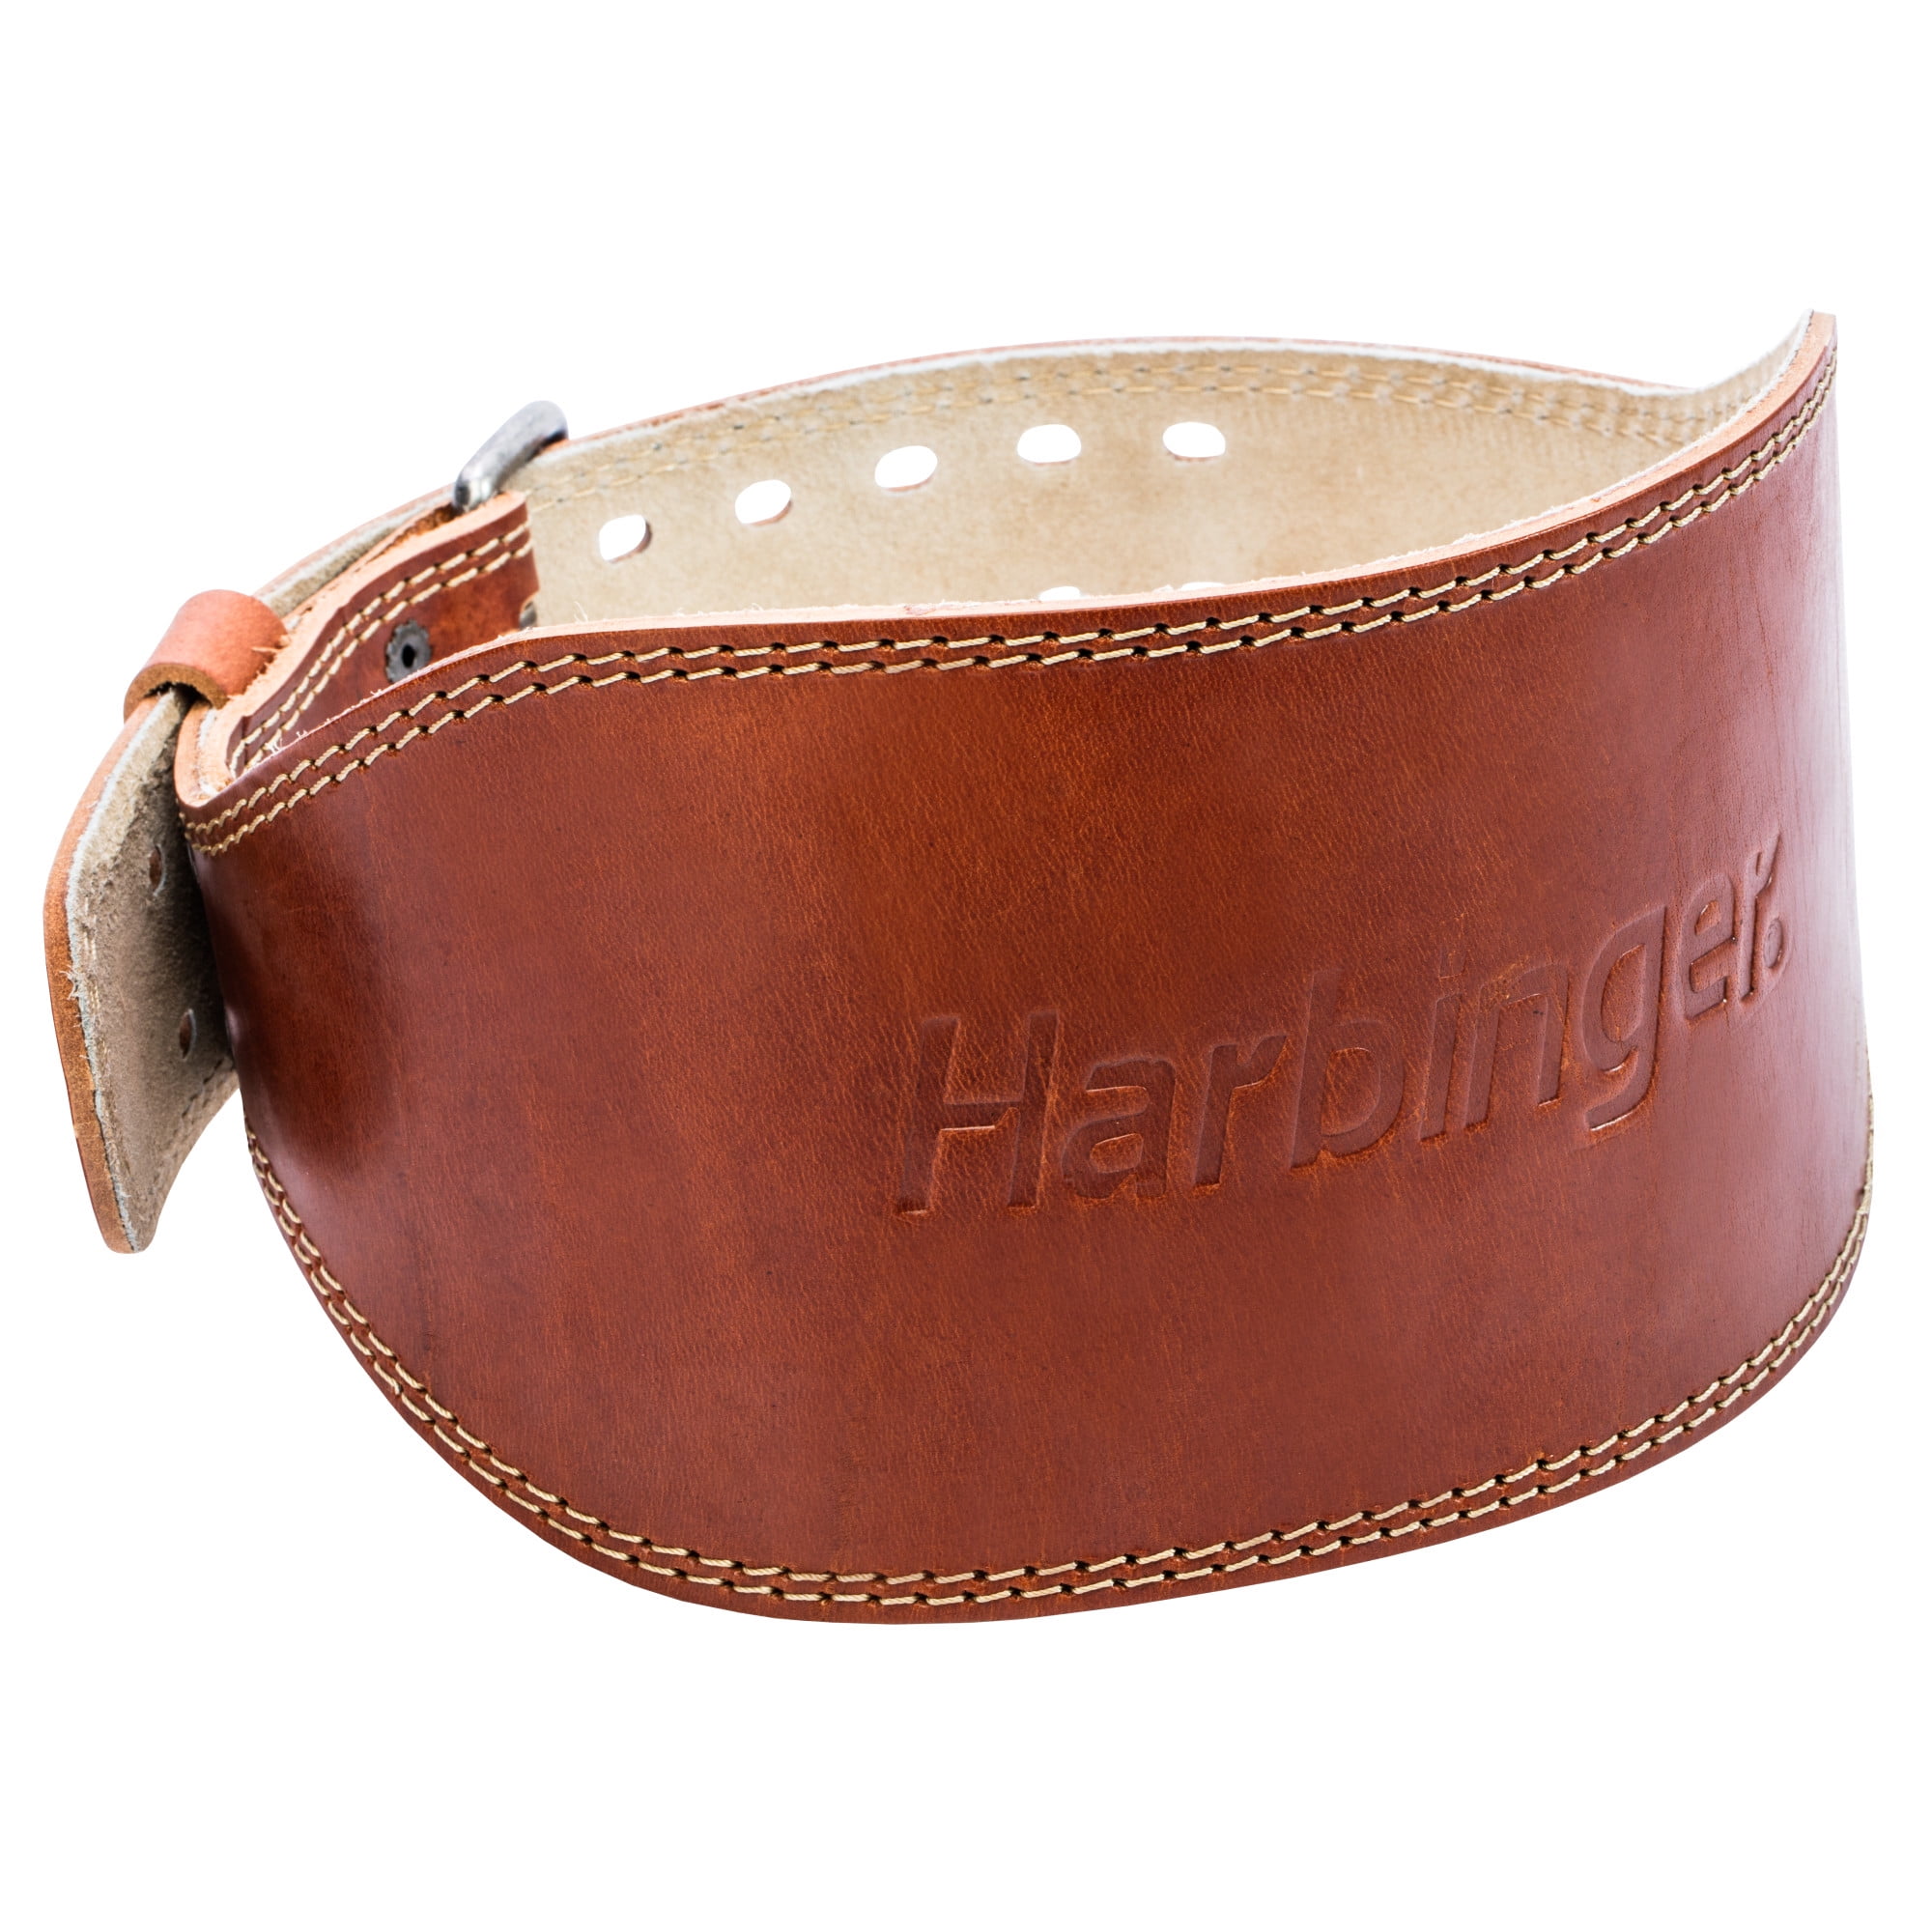 Harbinger 6-Inch Padded Leather Weightligting Belt with Countoured Design and Suede Lining 